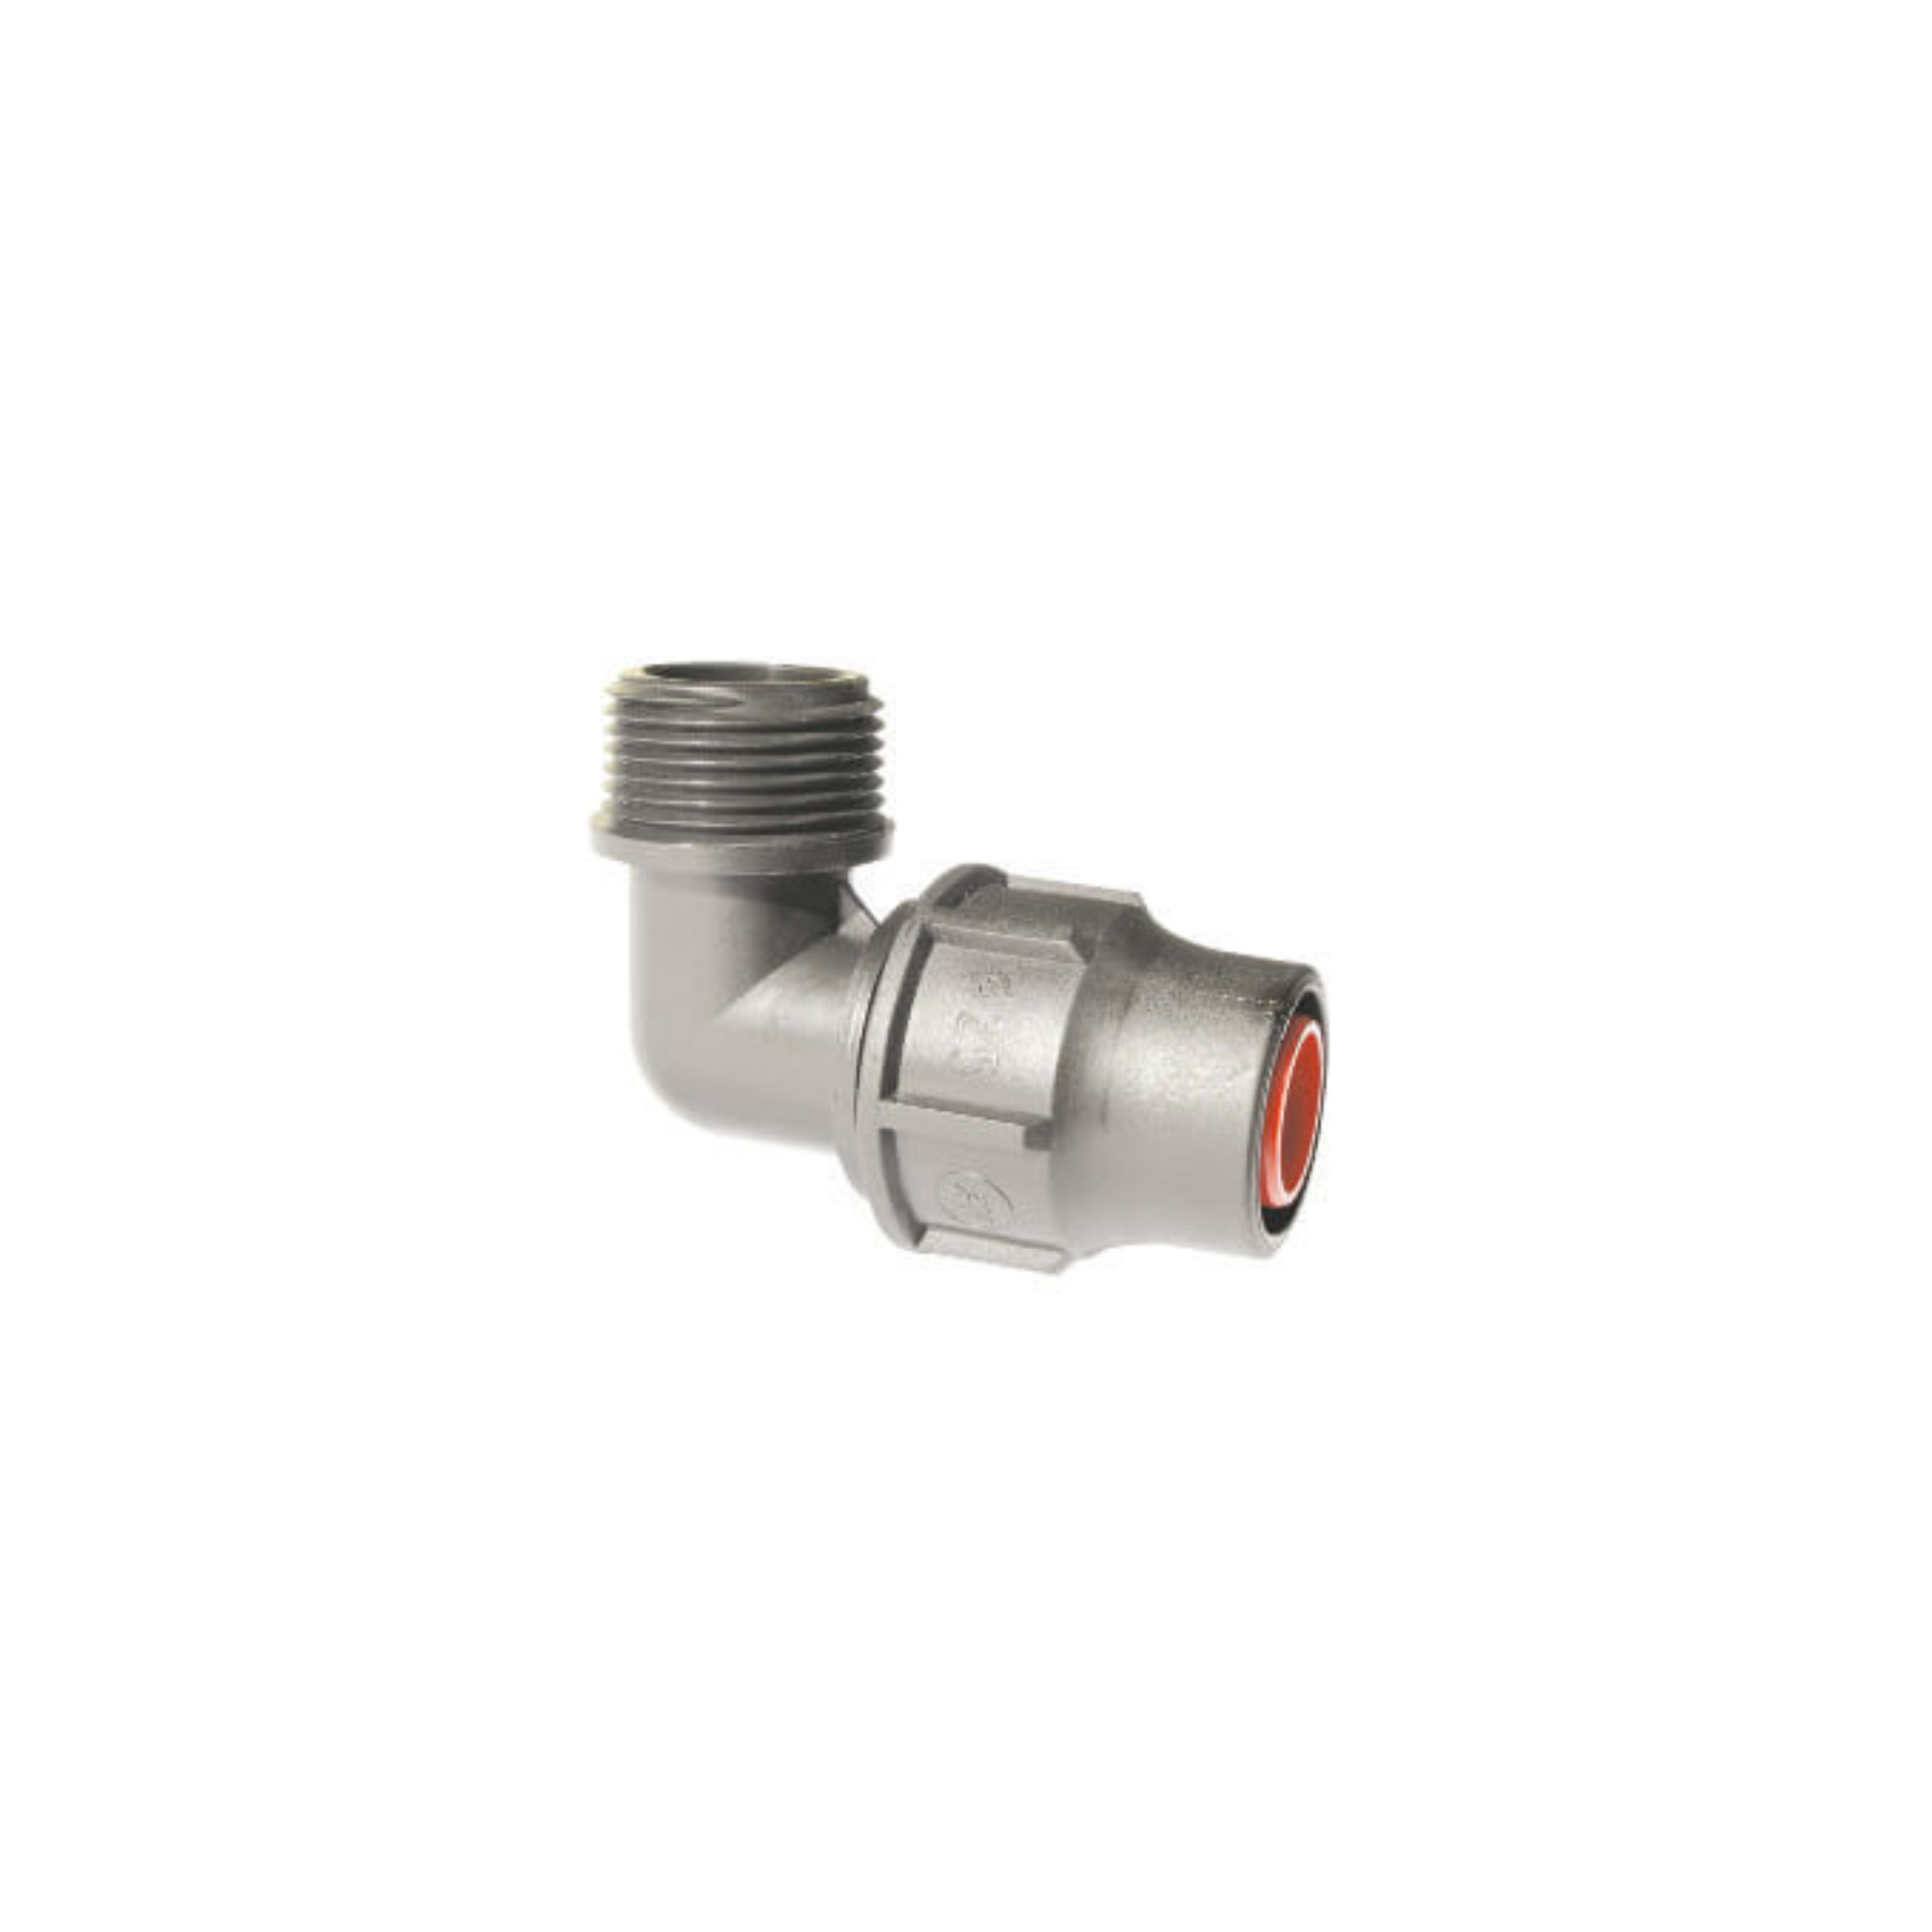 Lock Fittings for 20mm (17mm) LDPE Pipe